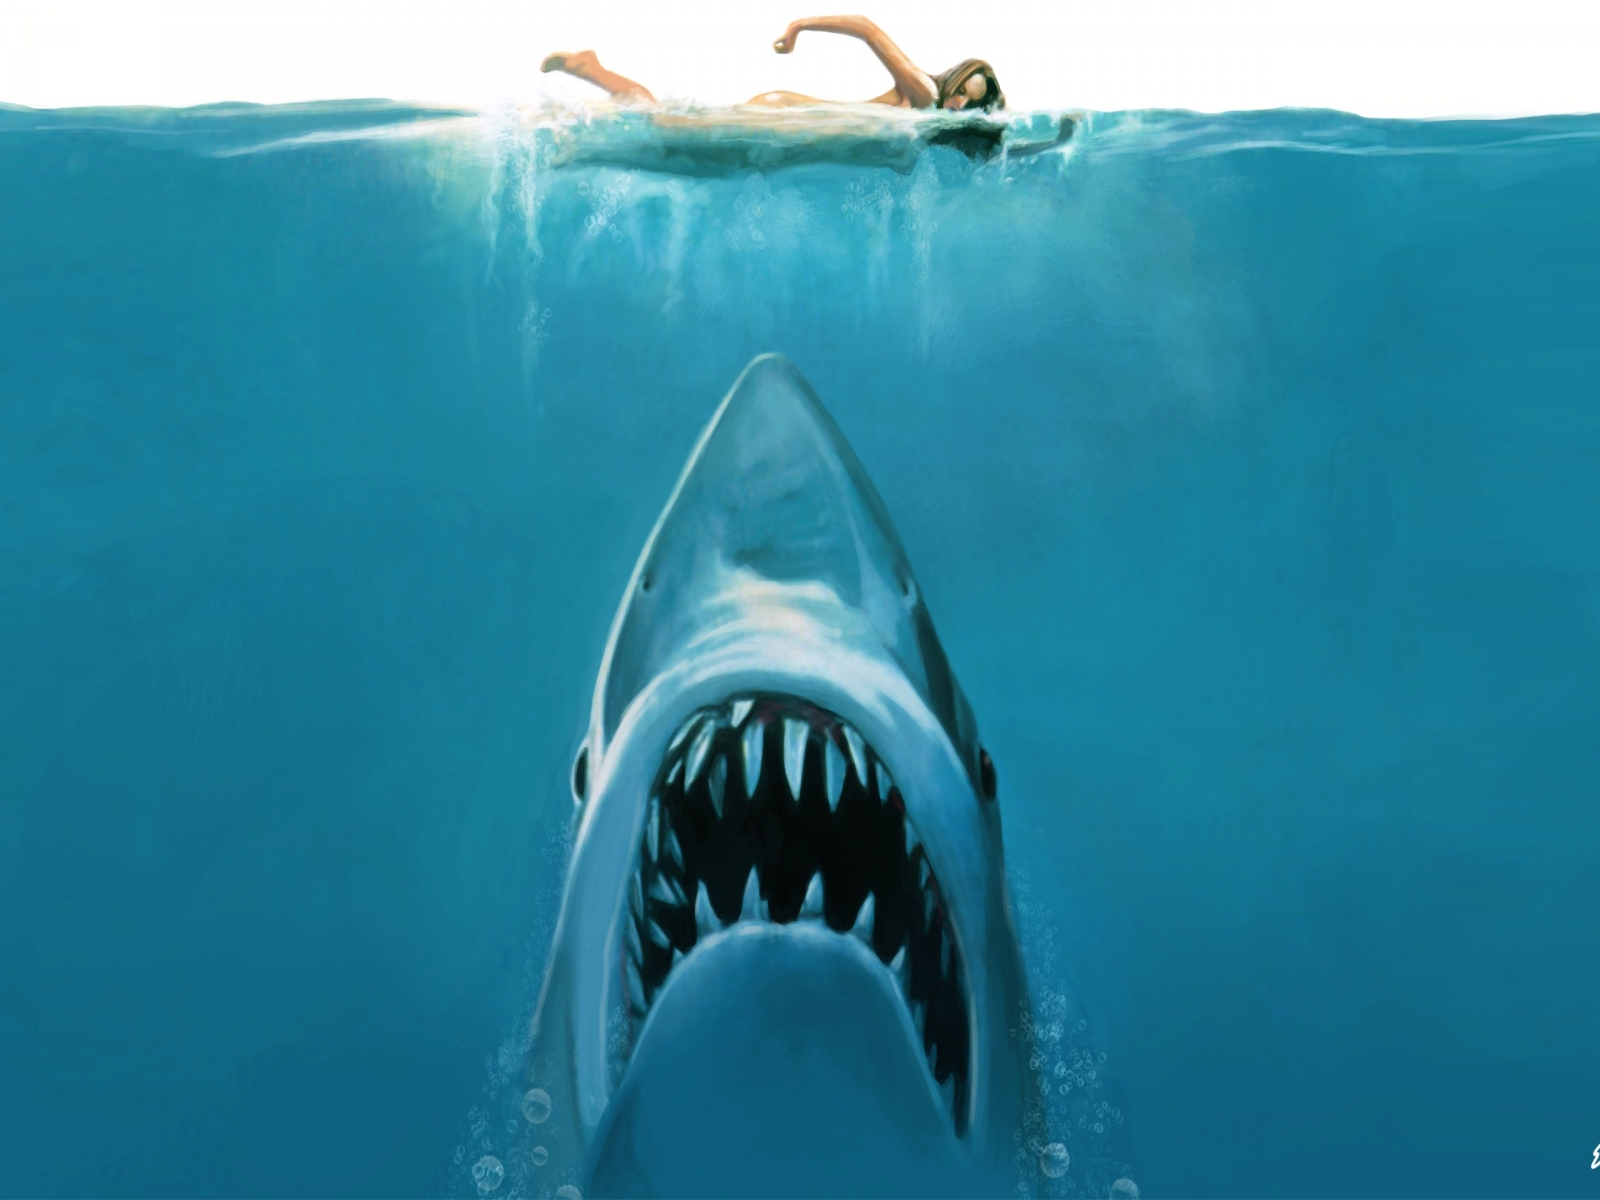 Wallpapers Jaws Movie Concept 6293 2560x1600 pixel Exotic Wallpaper 1600x1200